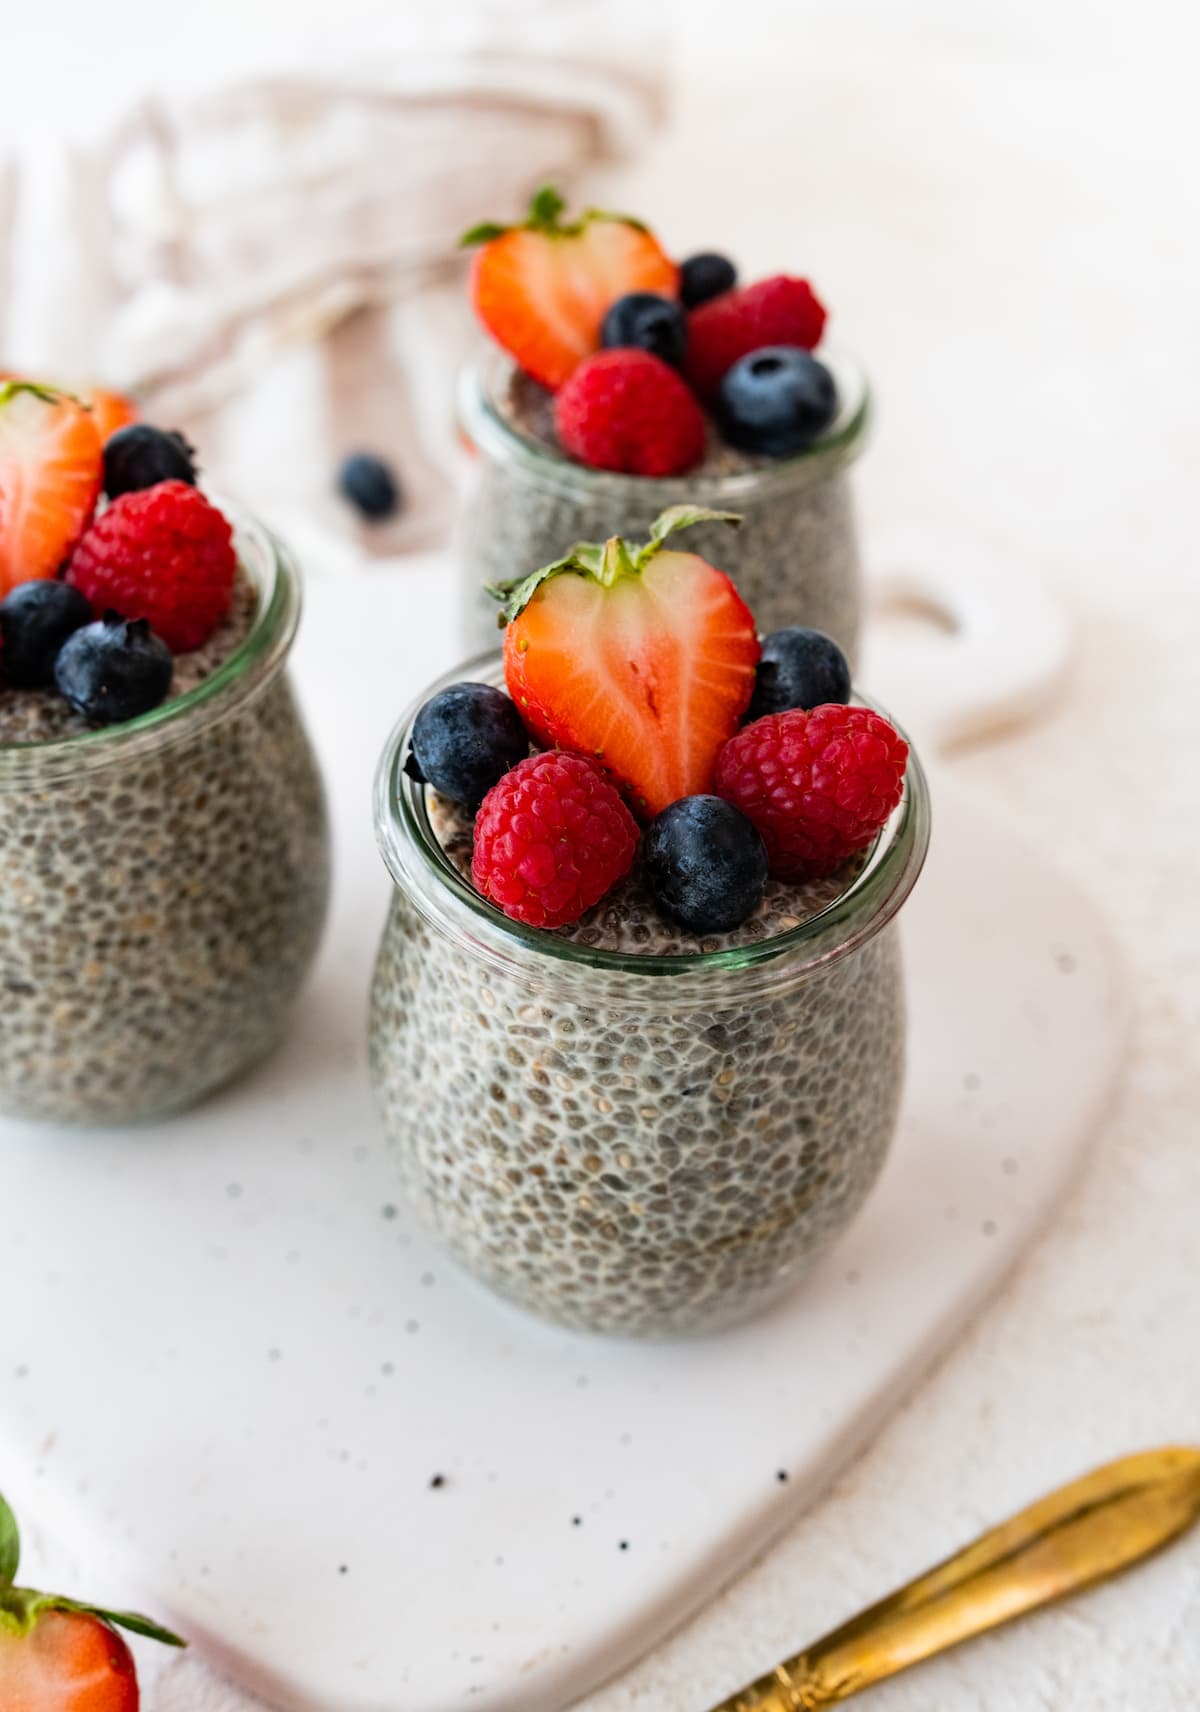 Three glass cups of chia pudding on a cutting board, topped with fresh berries.